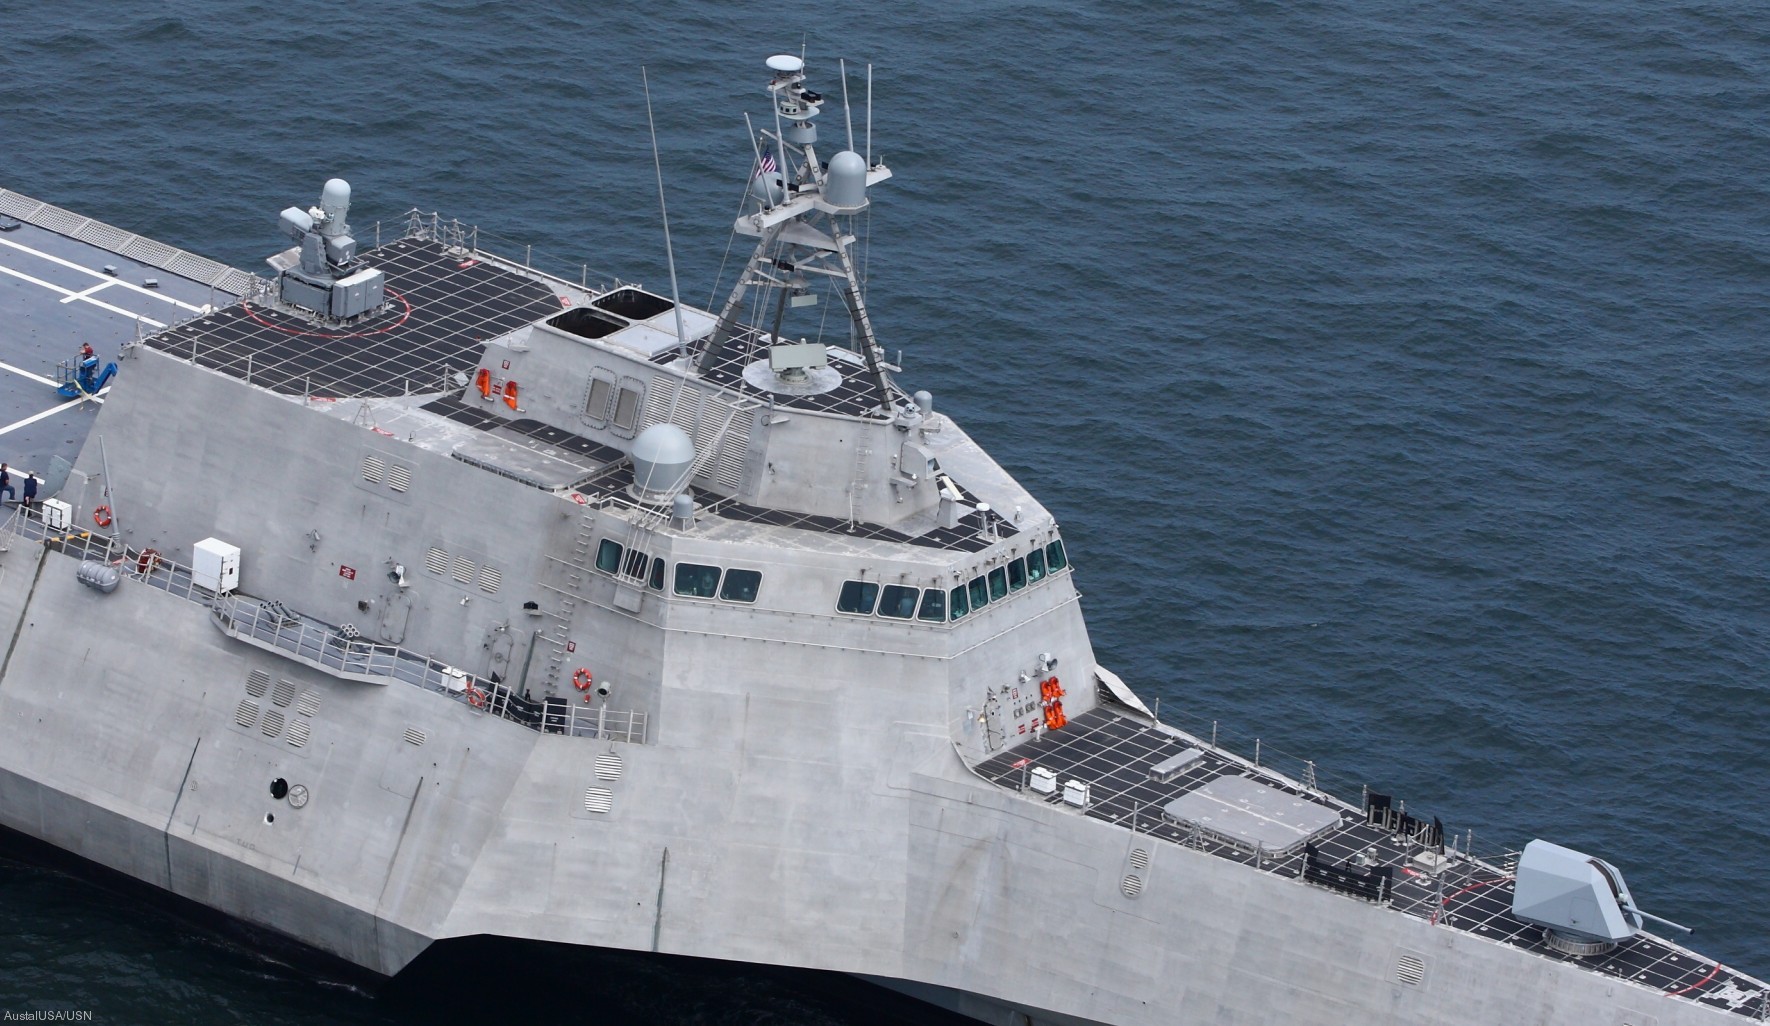 lcs-18 uss charleston independence class littoral combat ship navy 02a